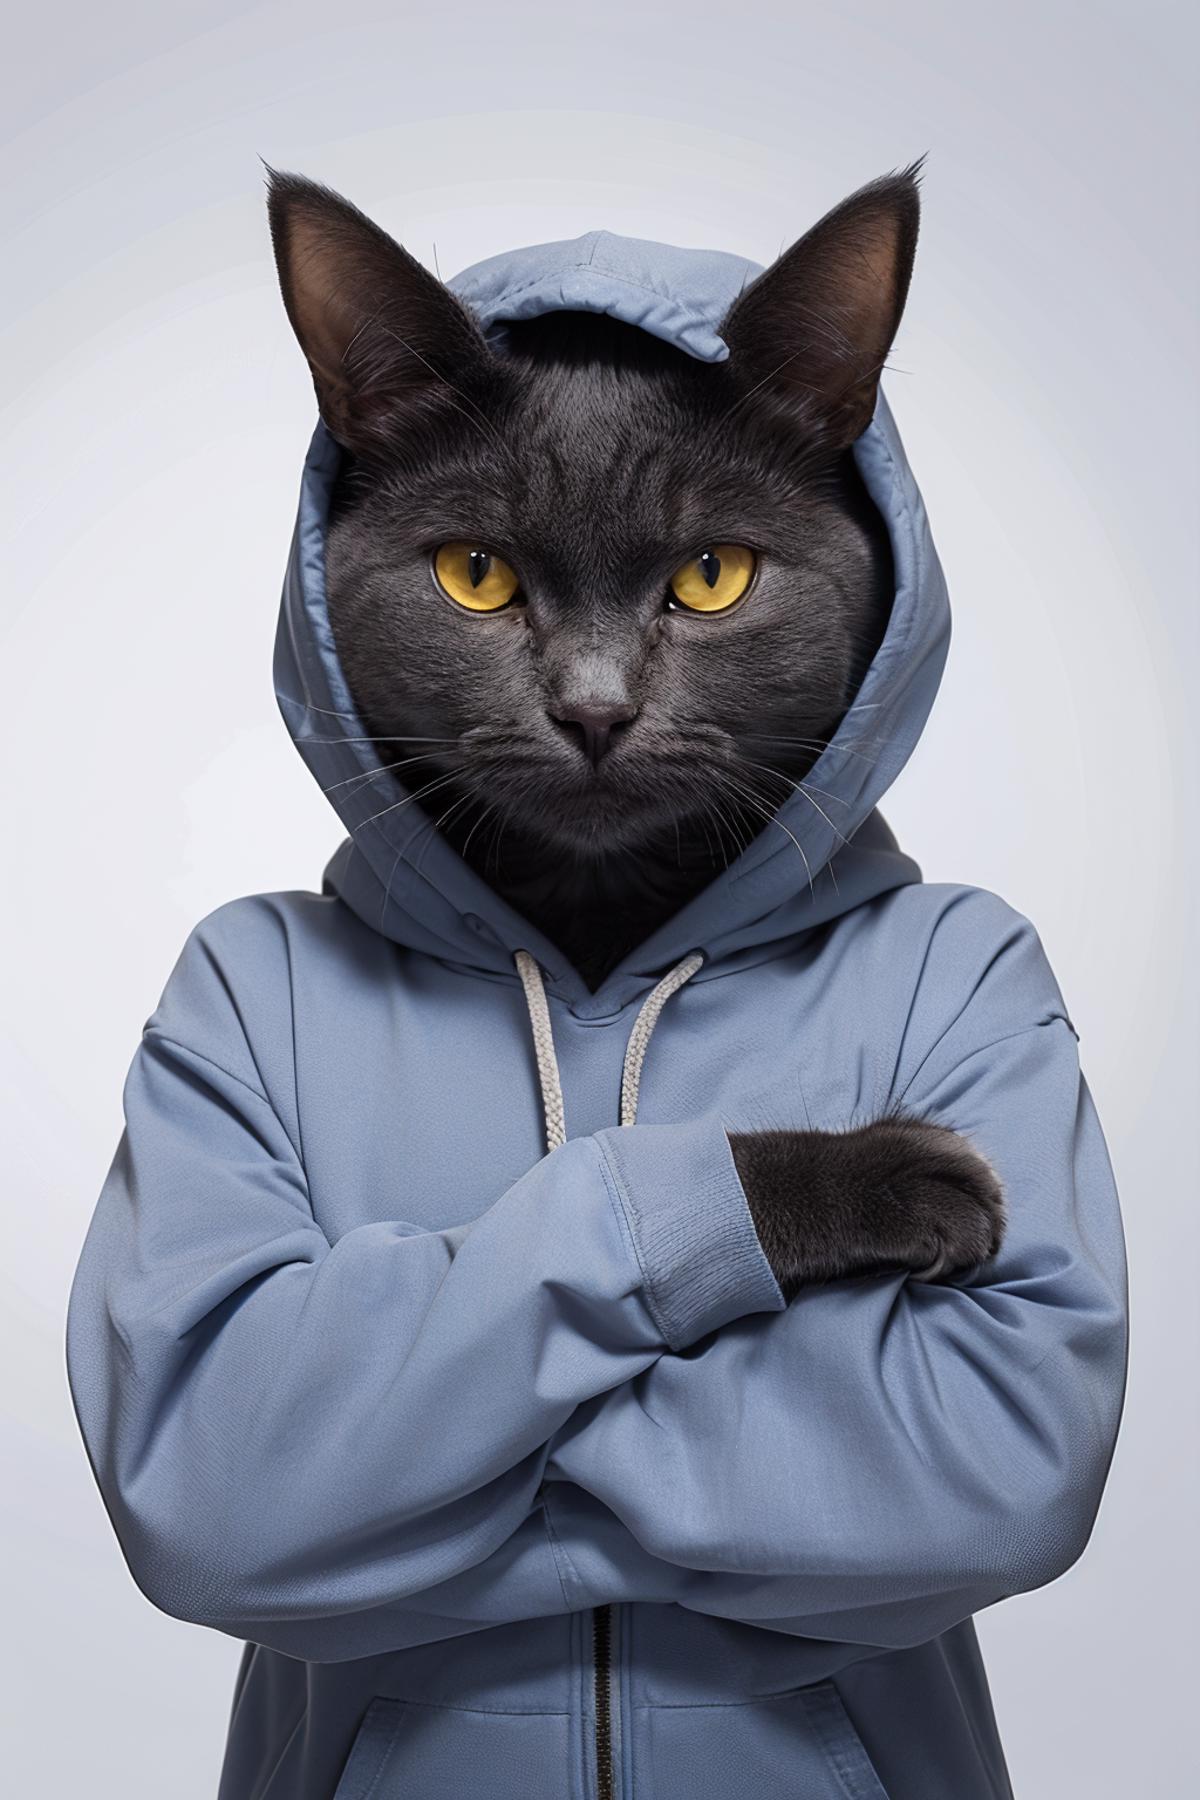 An image of a cat wearing a blue hoodie and posing.